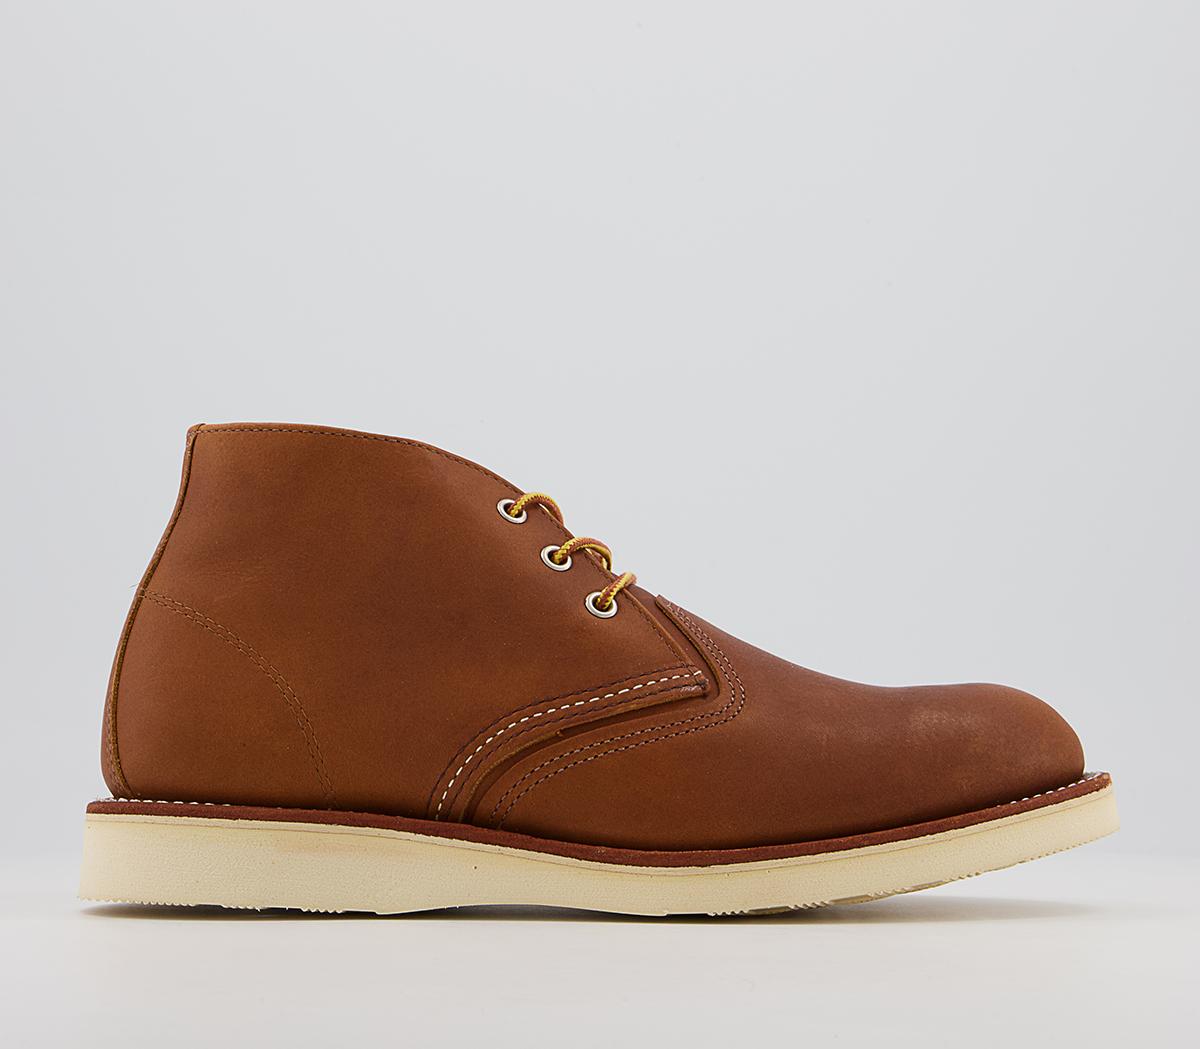 Red Wing Work Chukka Boots Tan Leather - Men’s Boots